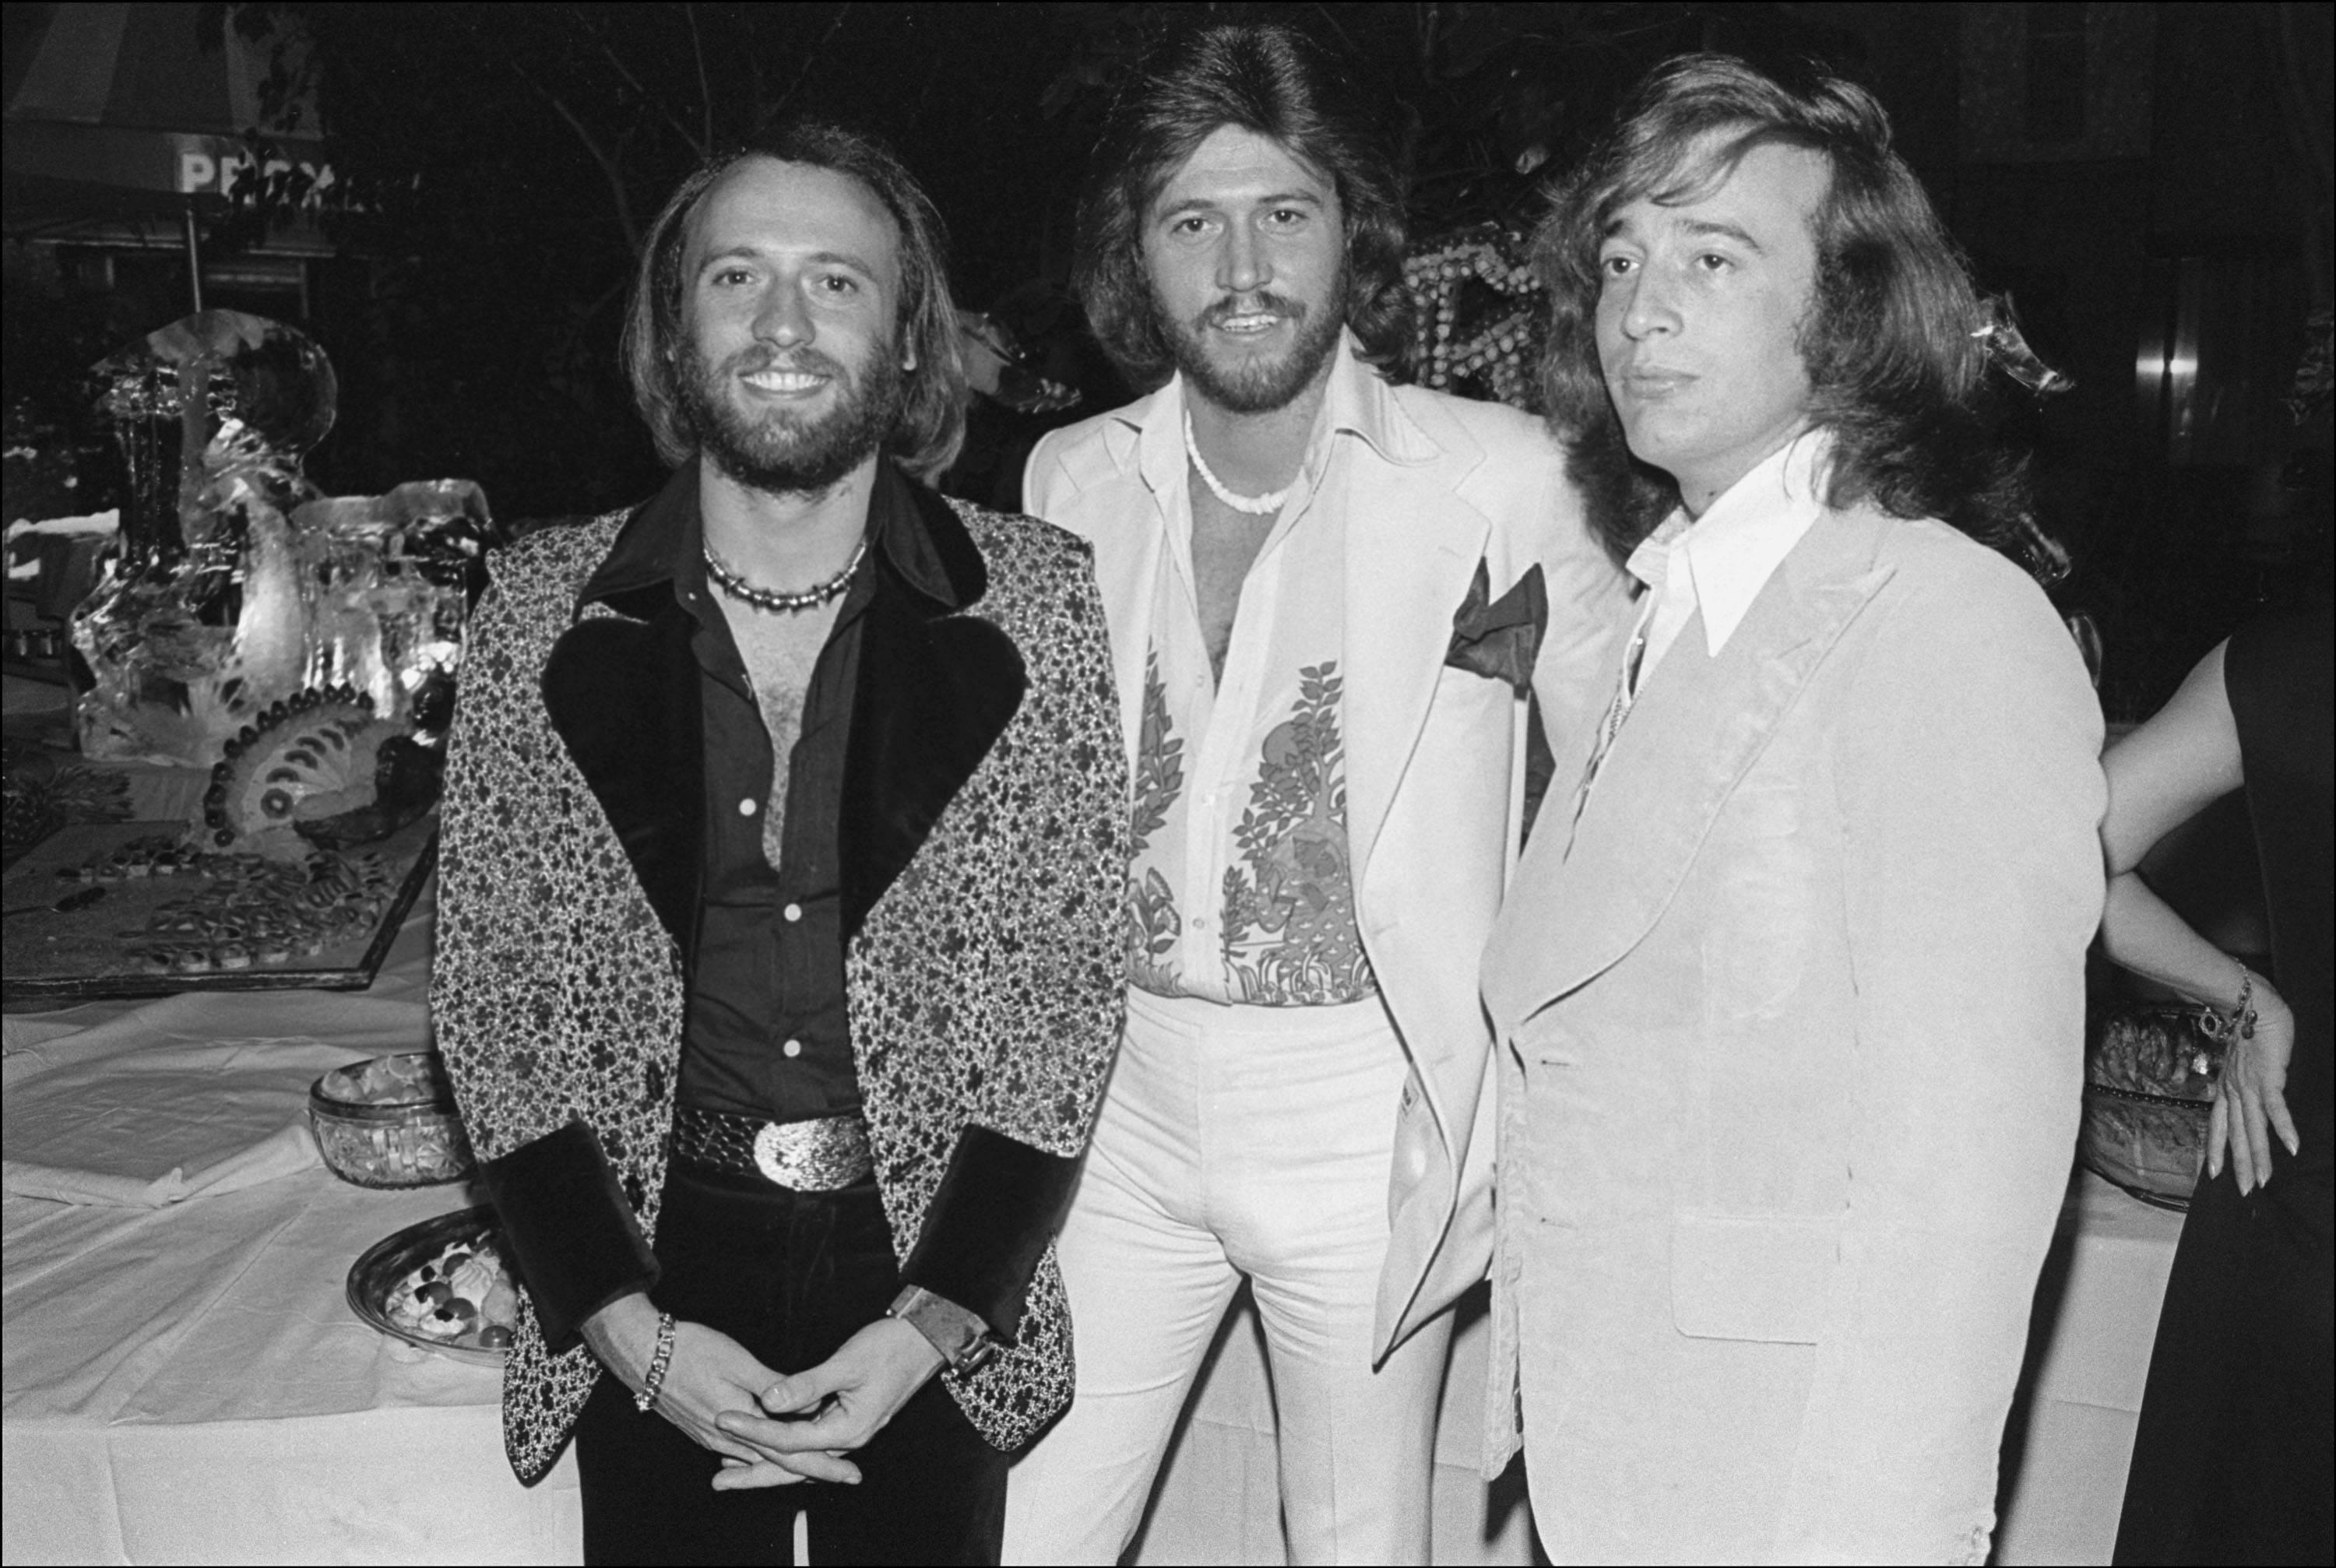 Allan Tannenbaum Black and White Photograph - The Bee Gees 20th Anniversary Party, 1975